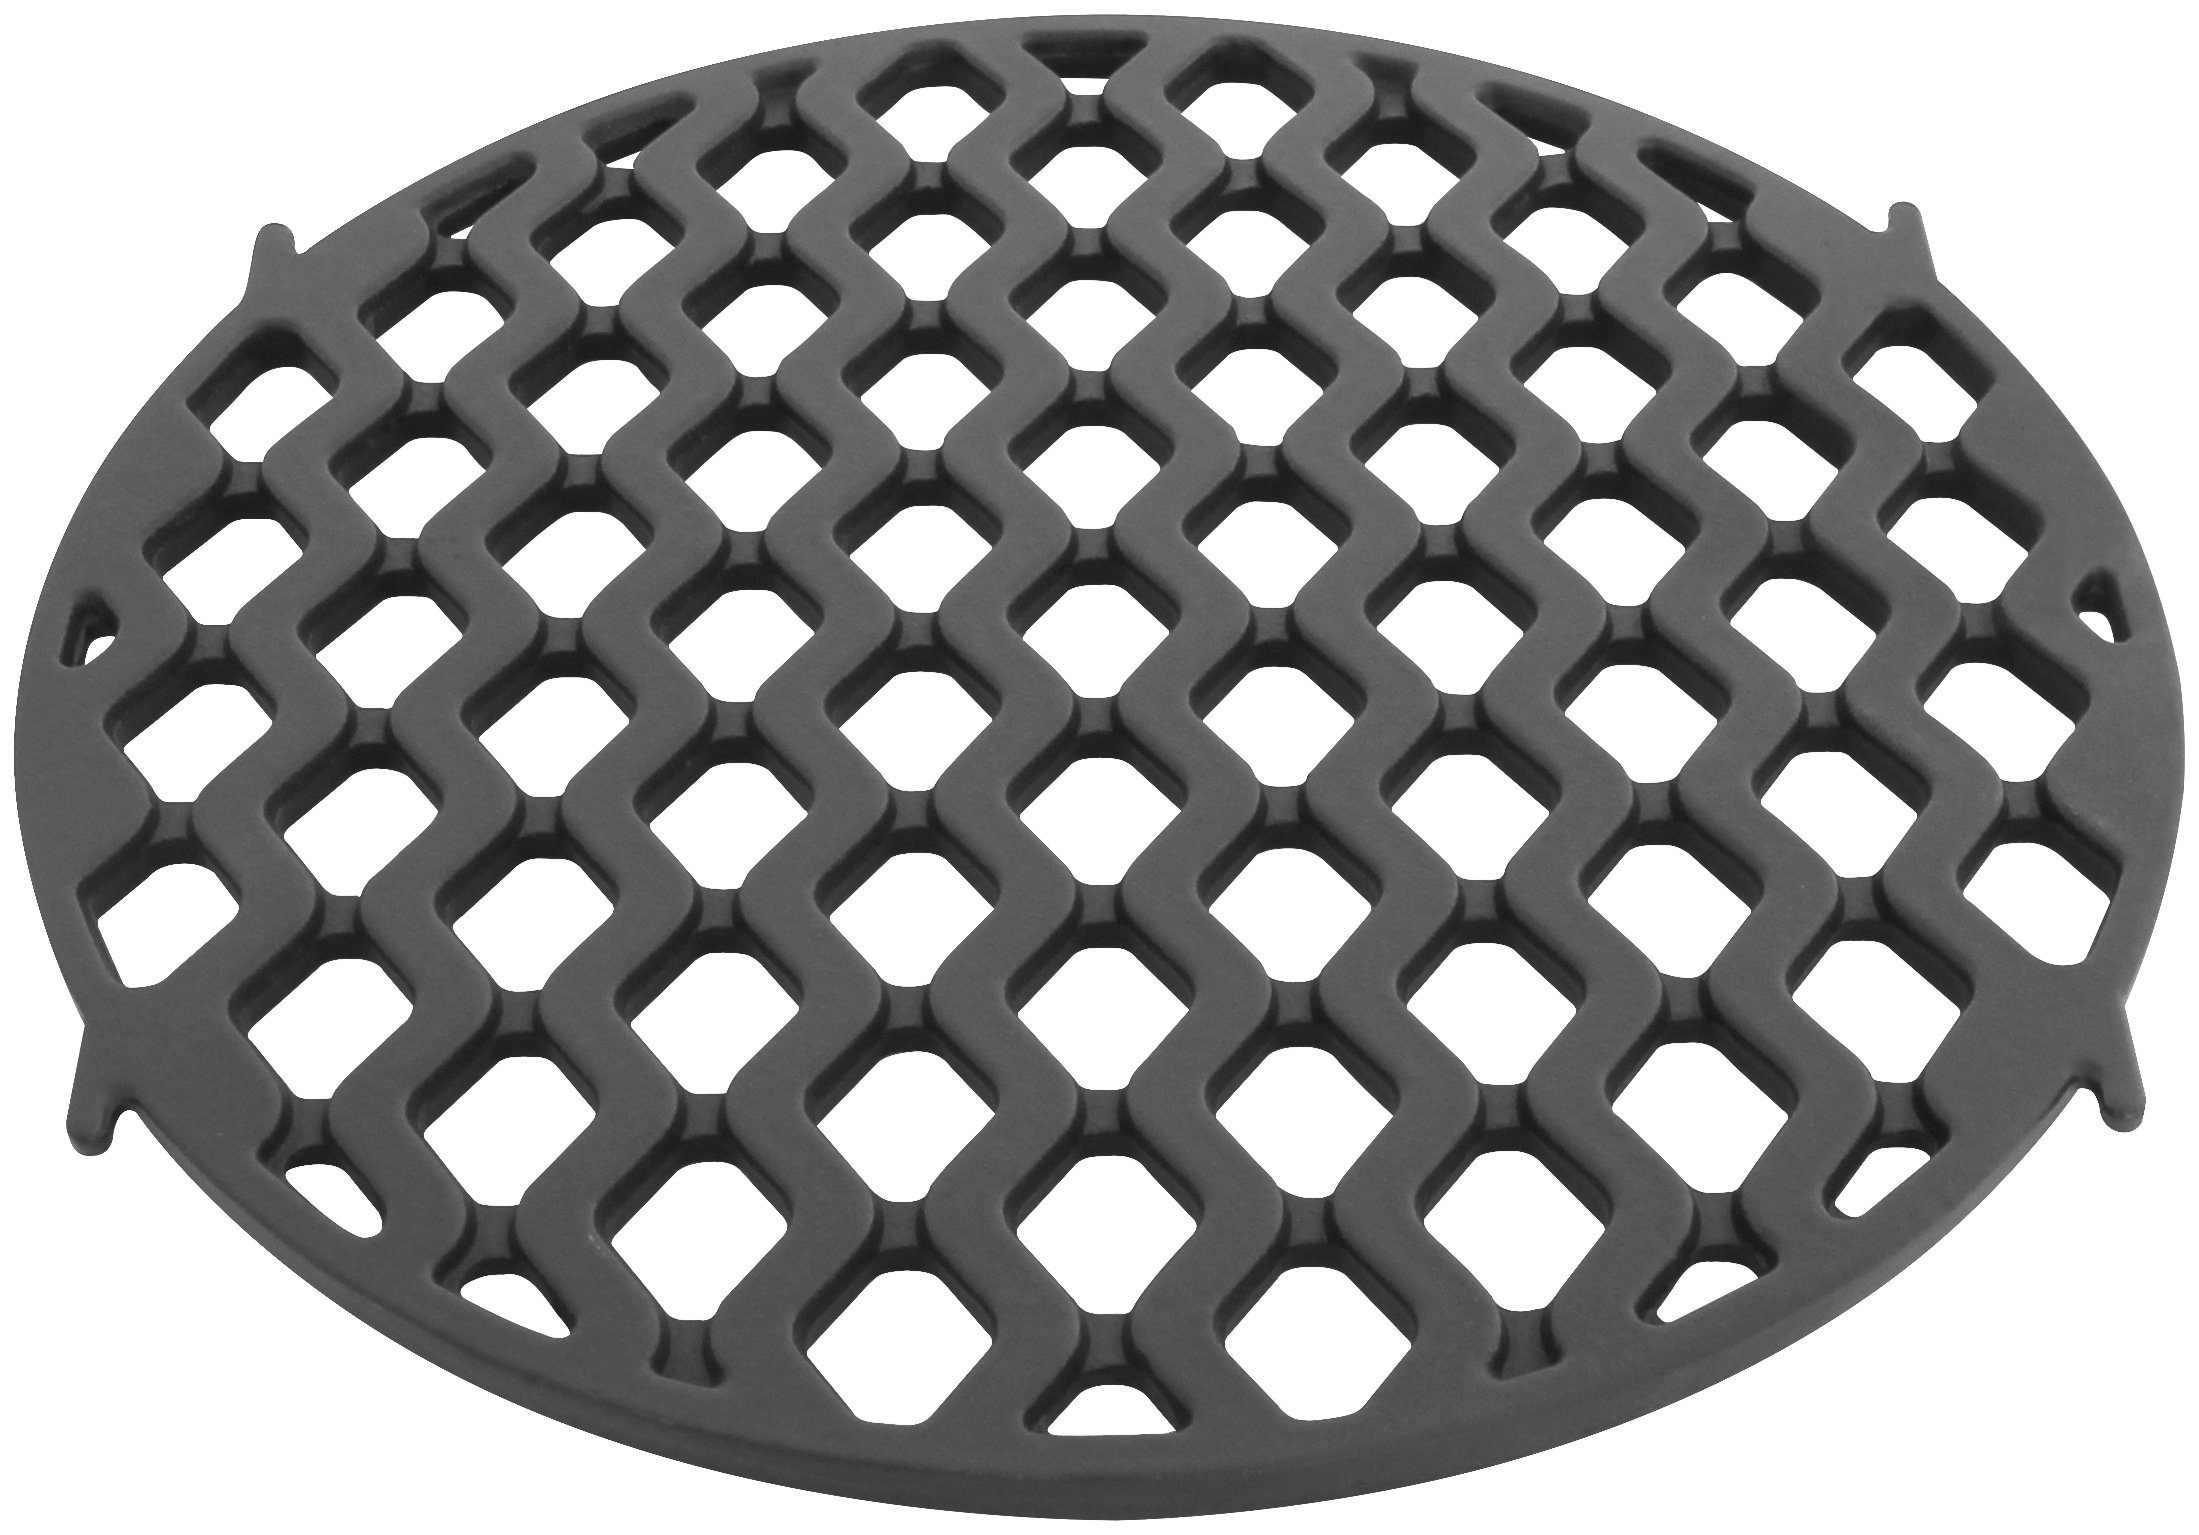 Enders® Grillrost SWITCH GRID Sear Grate, BxT: 30x30 cm